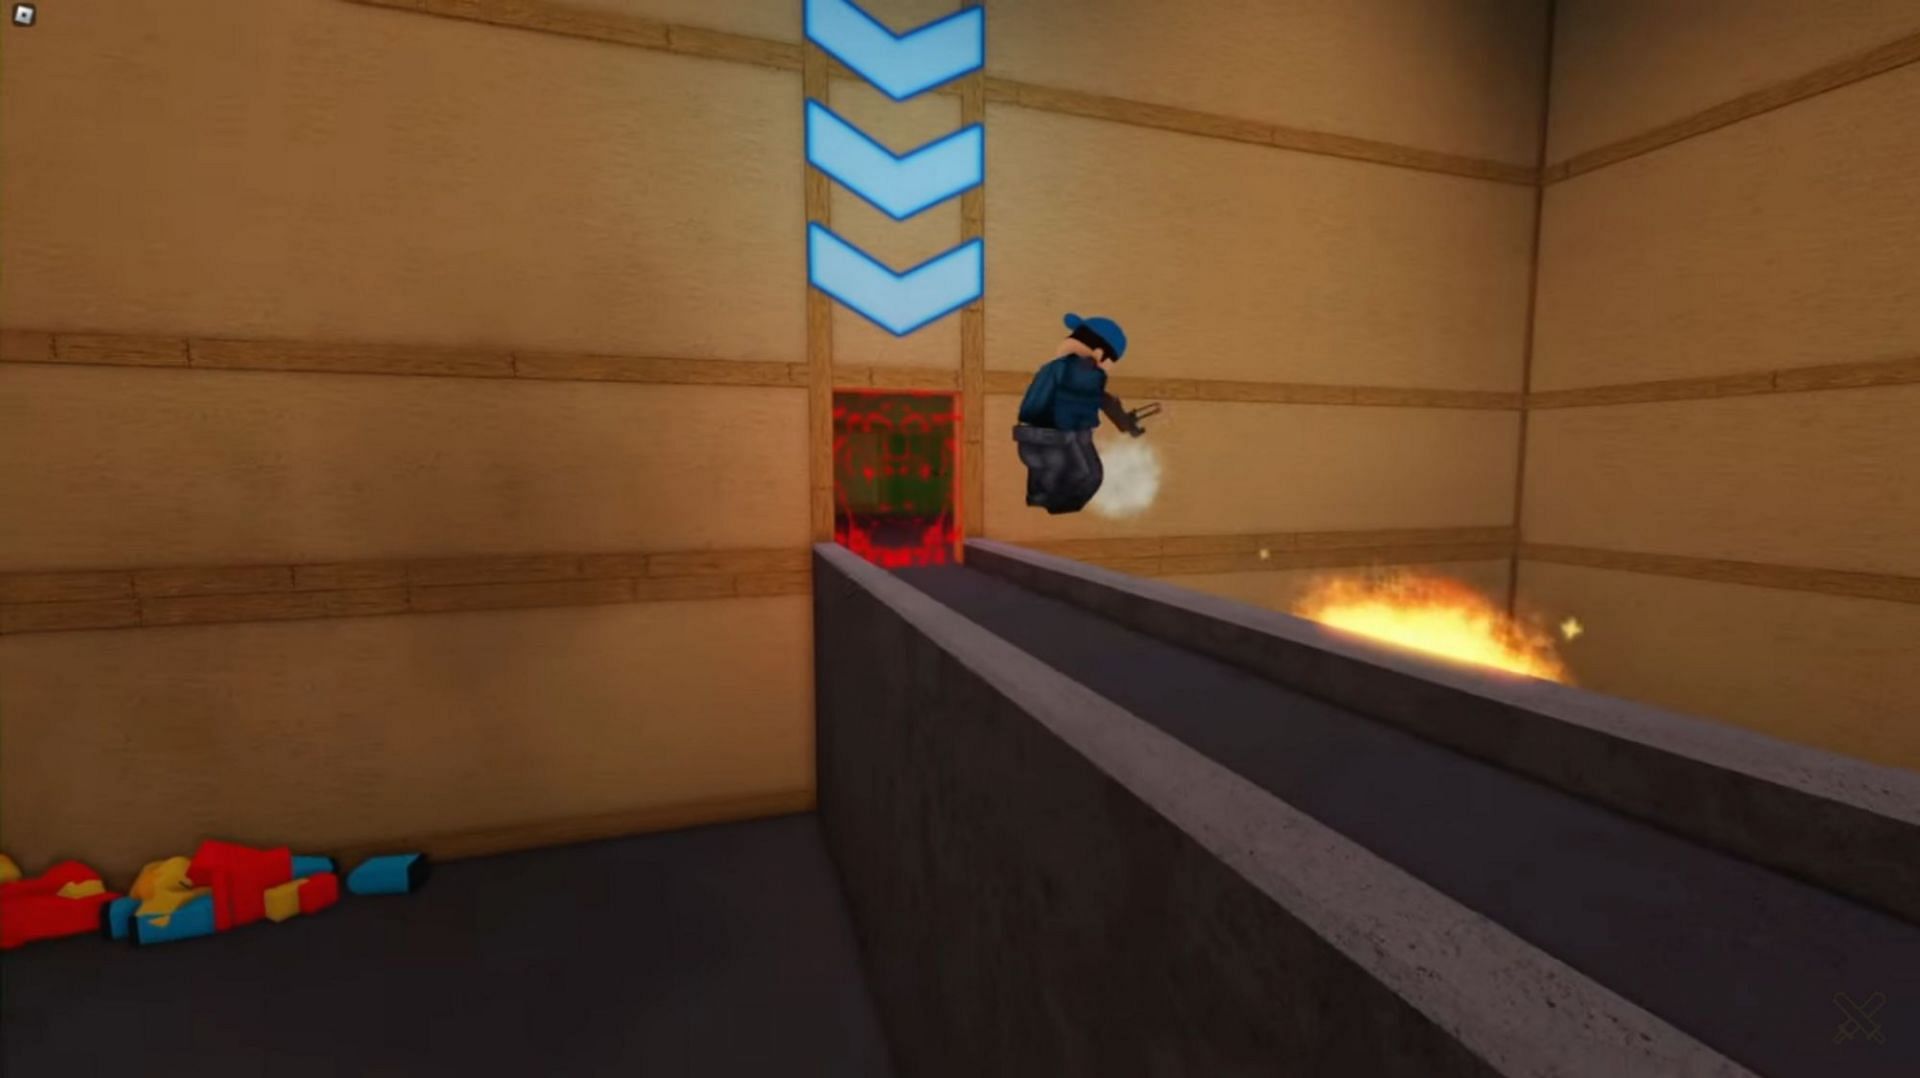 TanqR before falling from the bridge (Image via Roblox Battles YouTube)